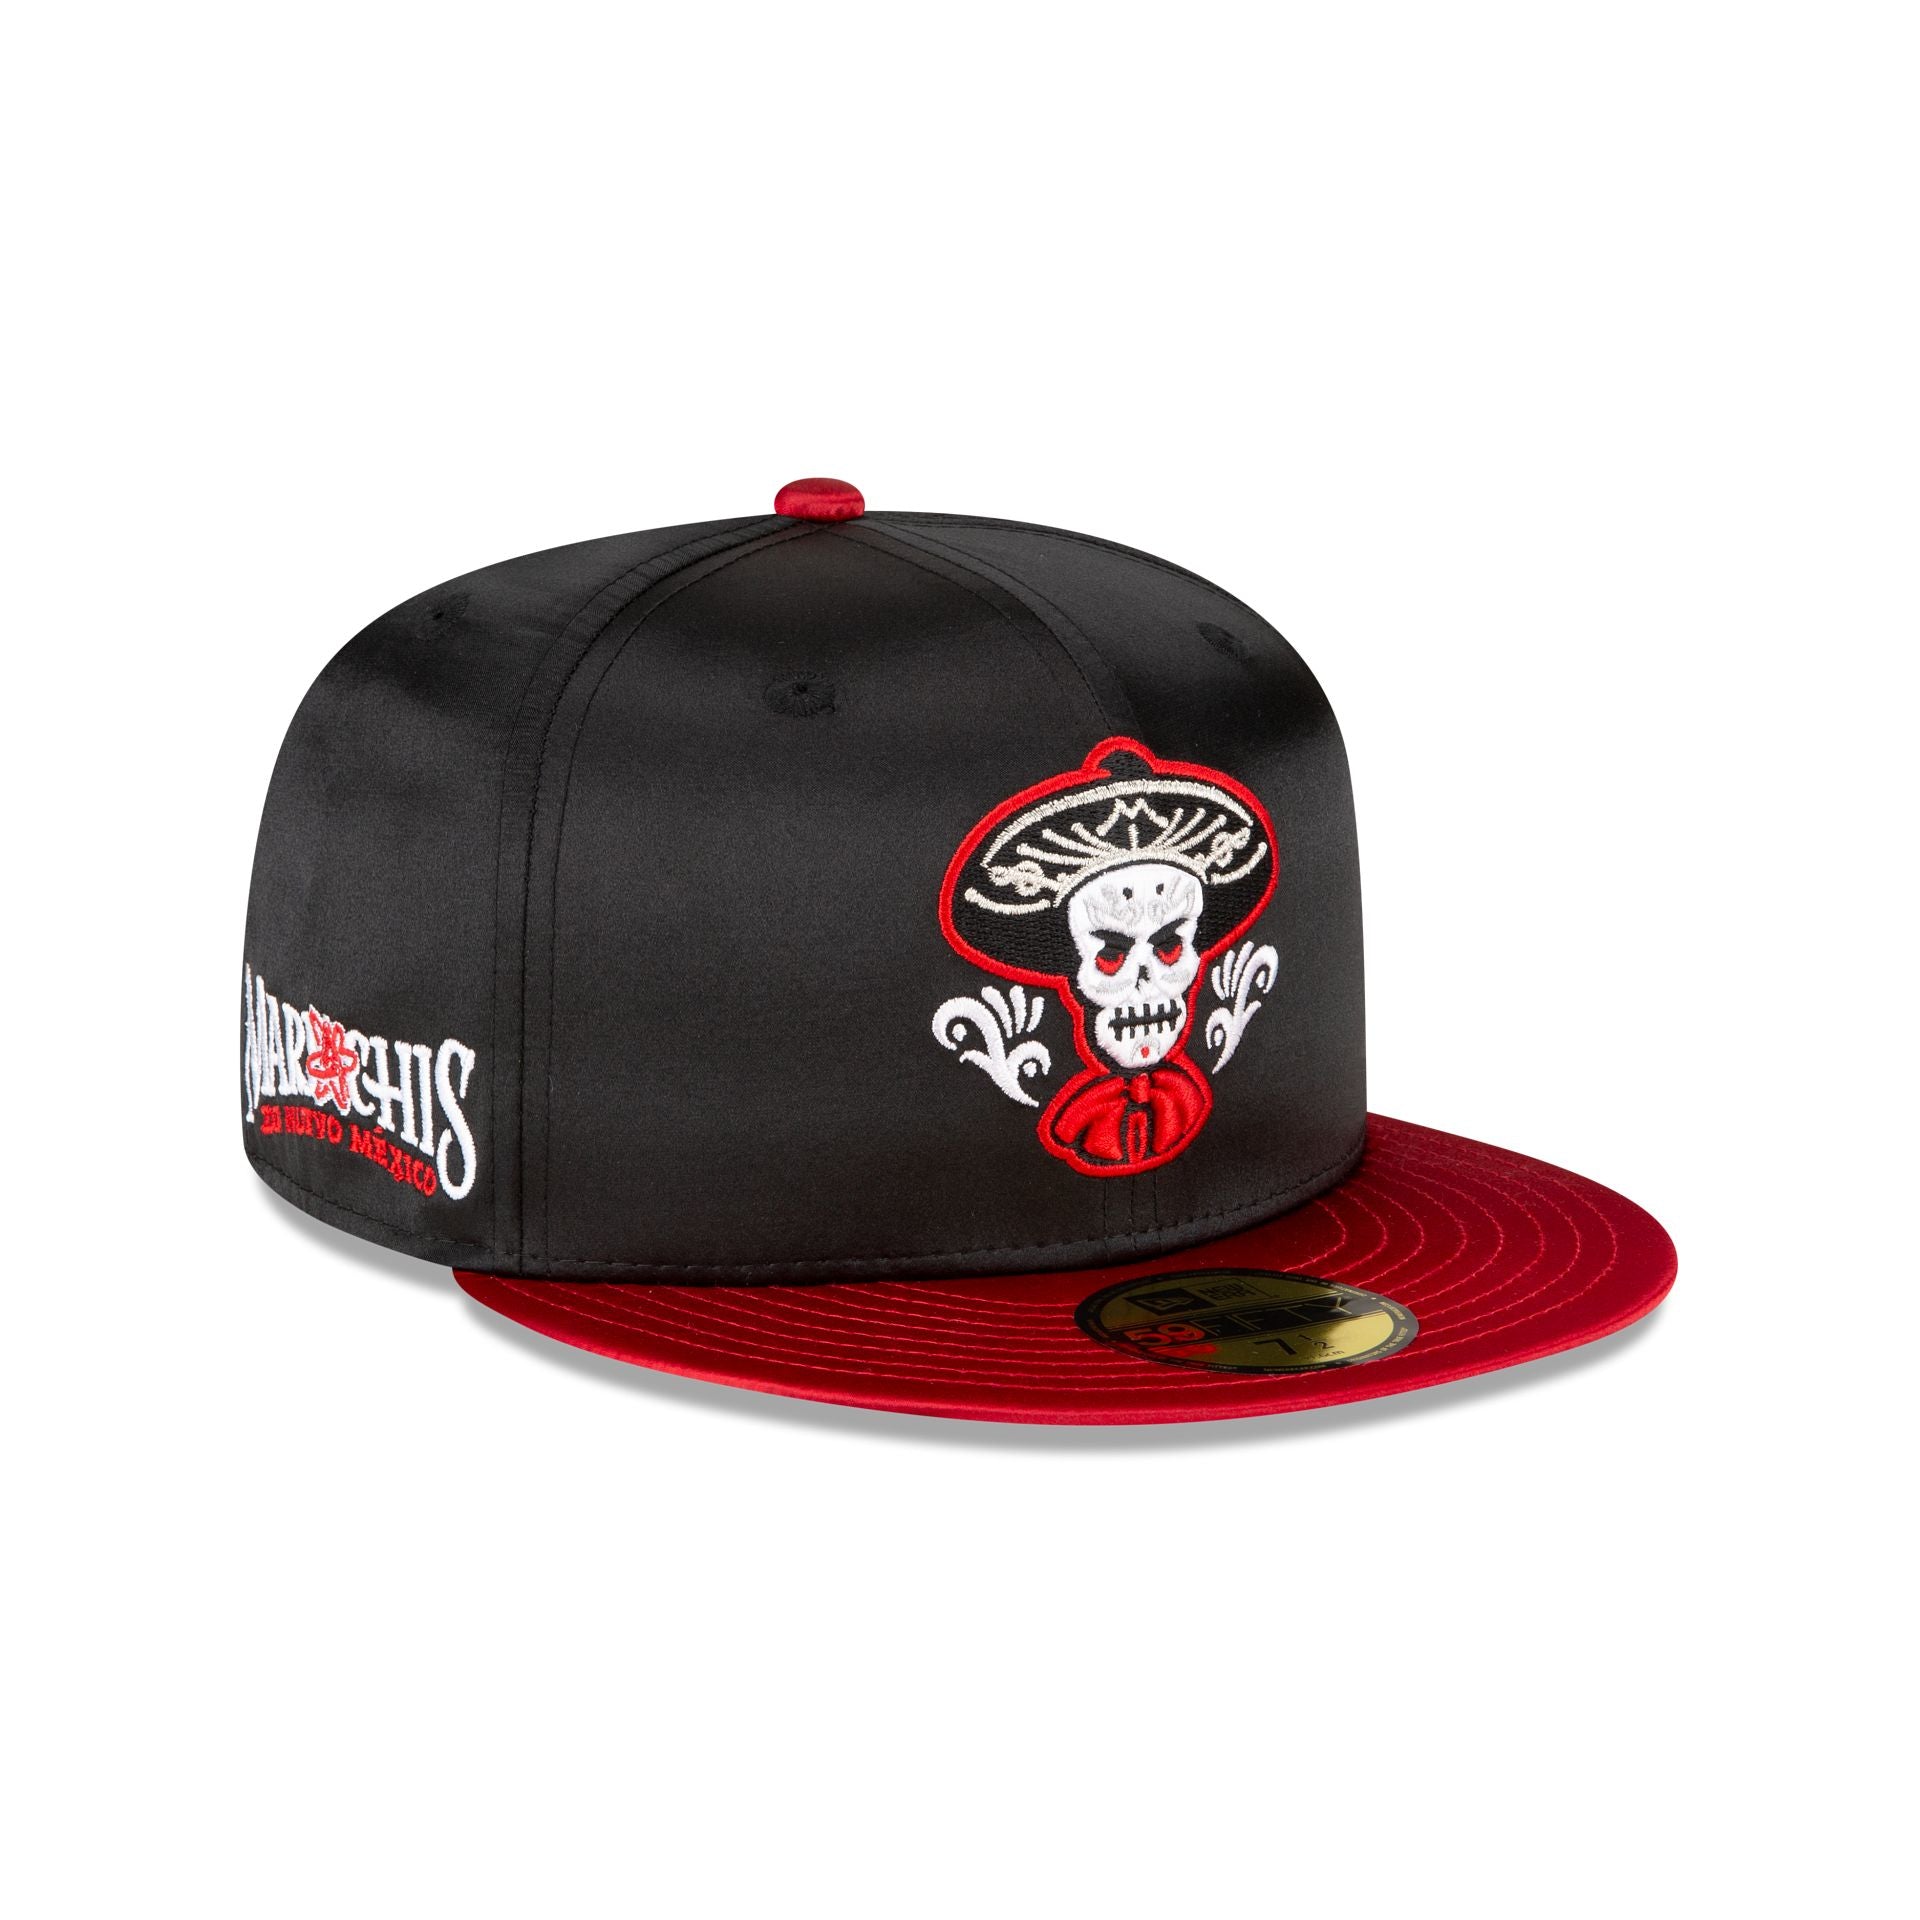 Albuquerque Isotopes Black Satin 59FIFTY Fitted Hat – New Era Cap